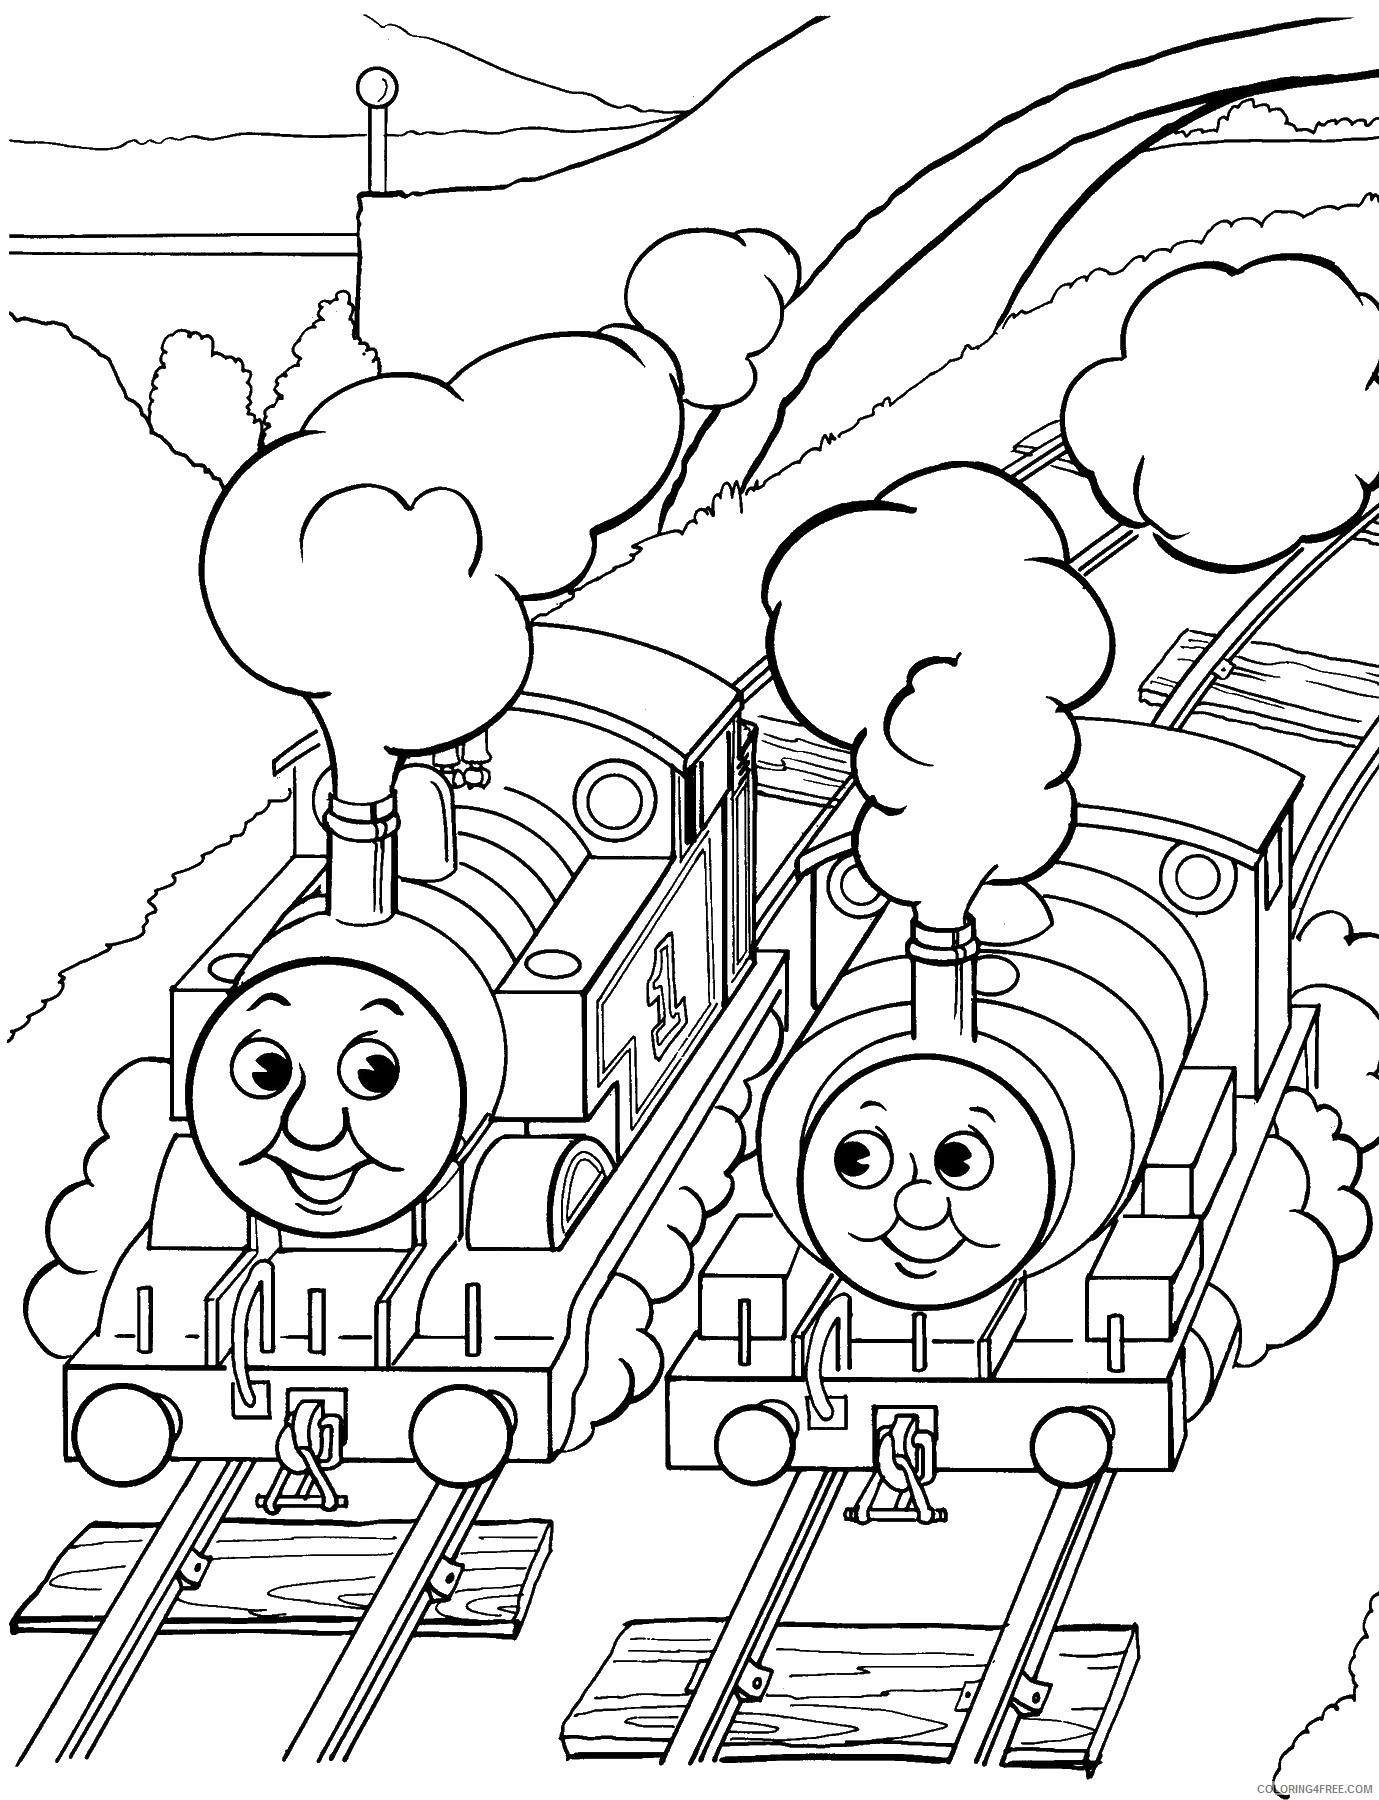 Thomas and Friends Coloring Pages Cartoons thomas_tank_engine_cl35 Printable 2020 6528 Coloring4free